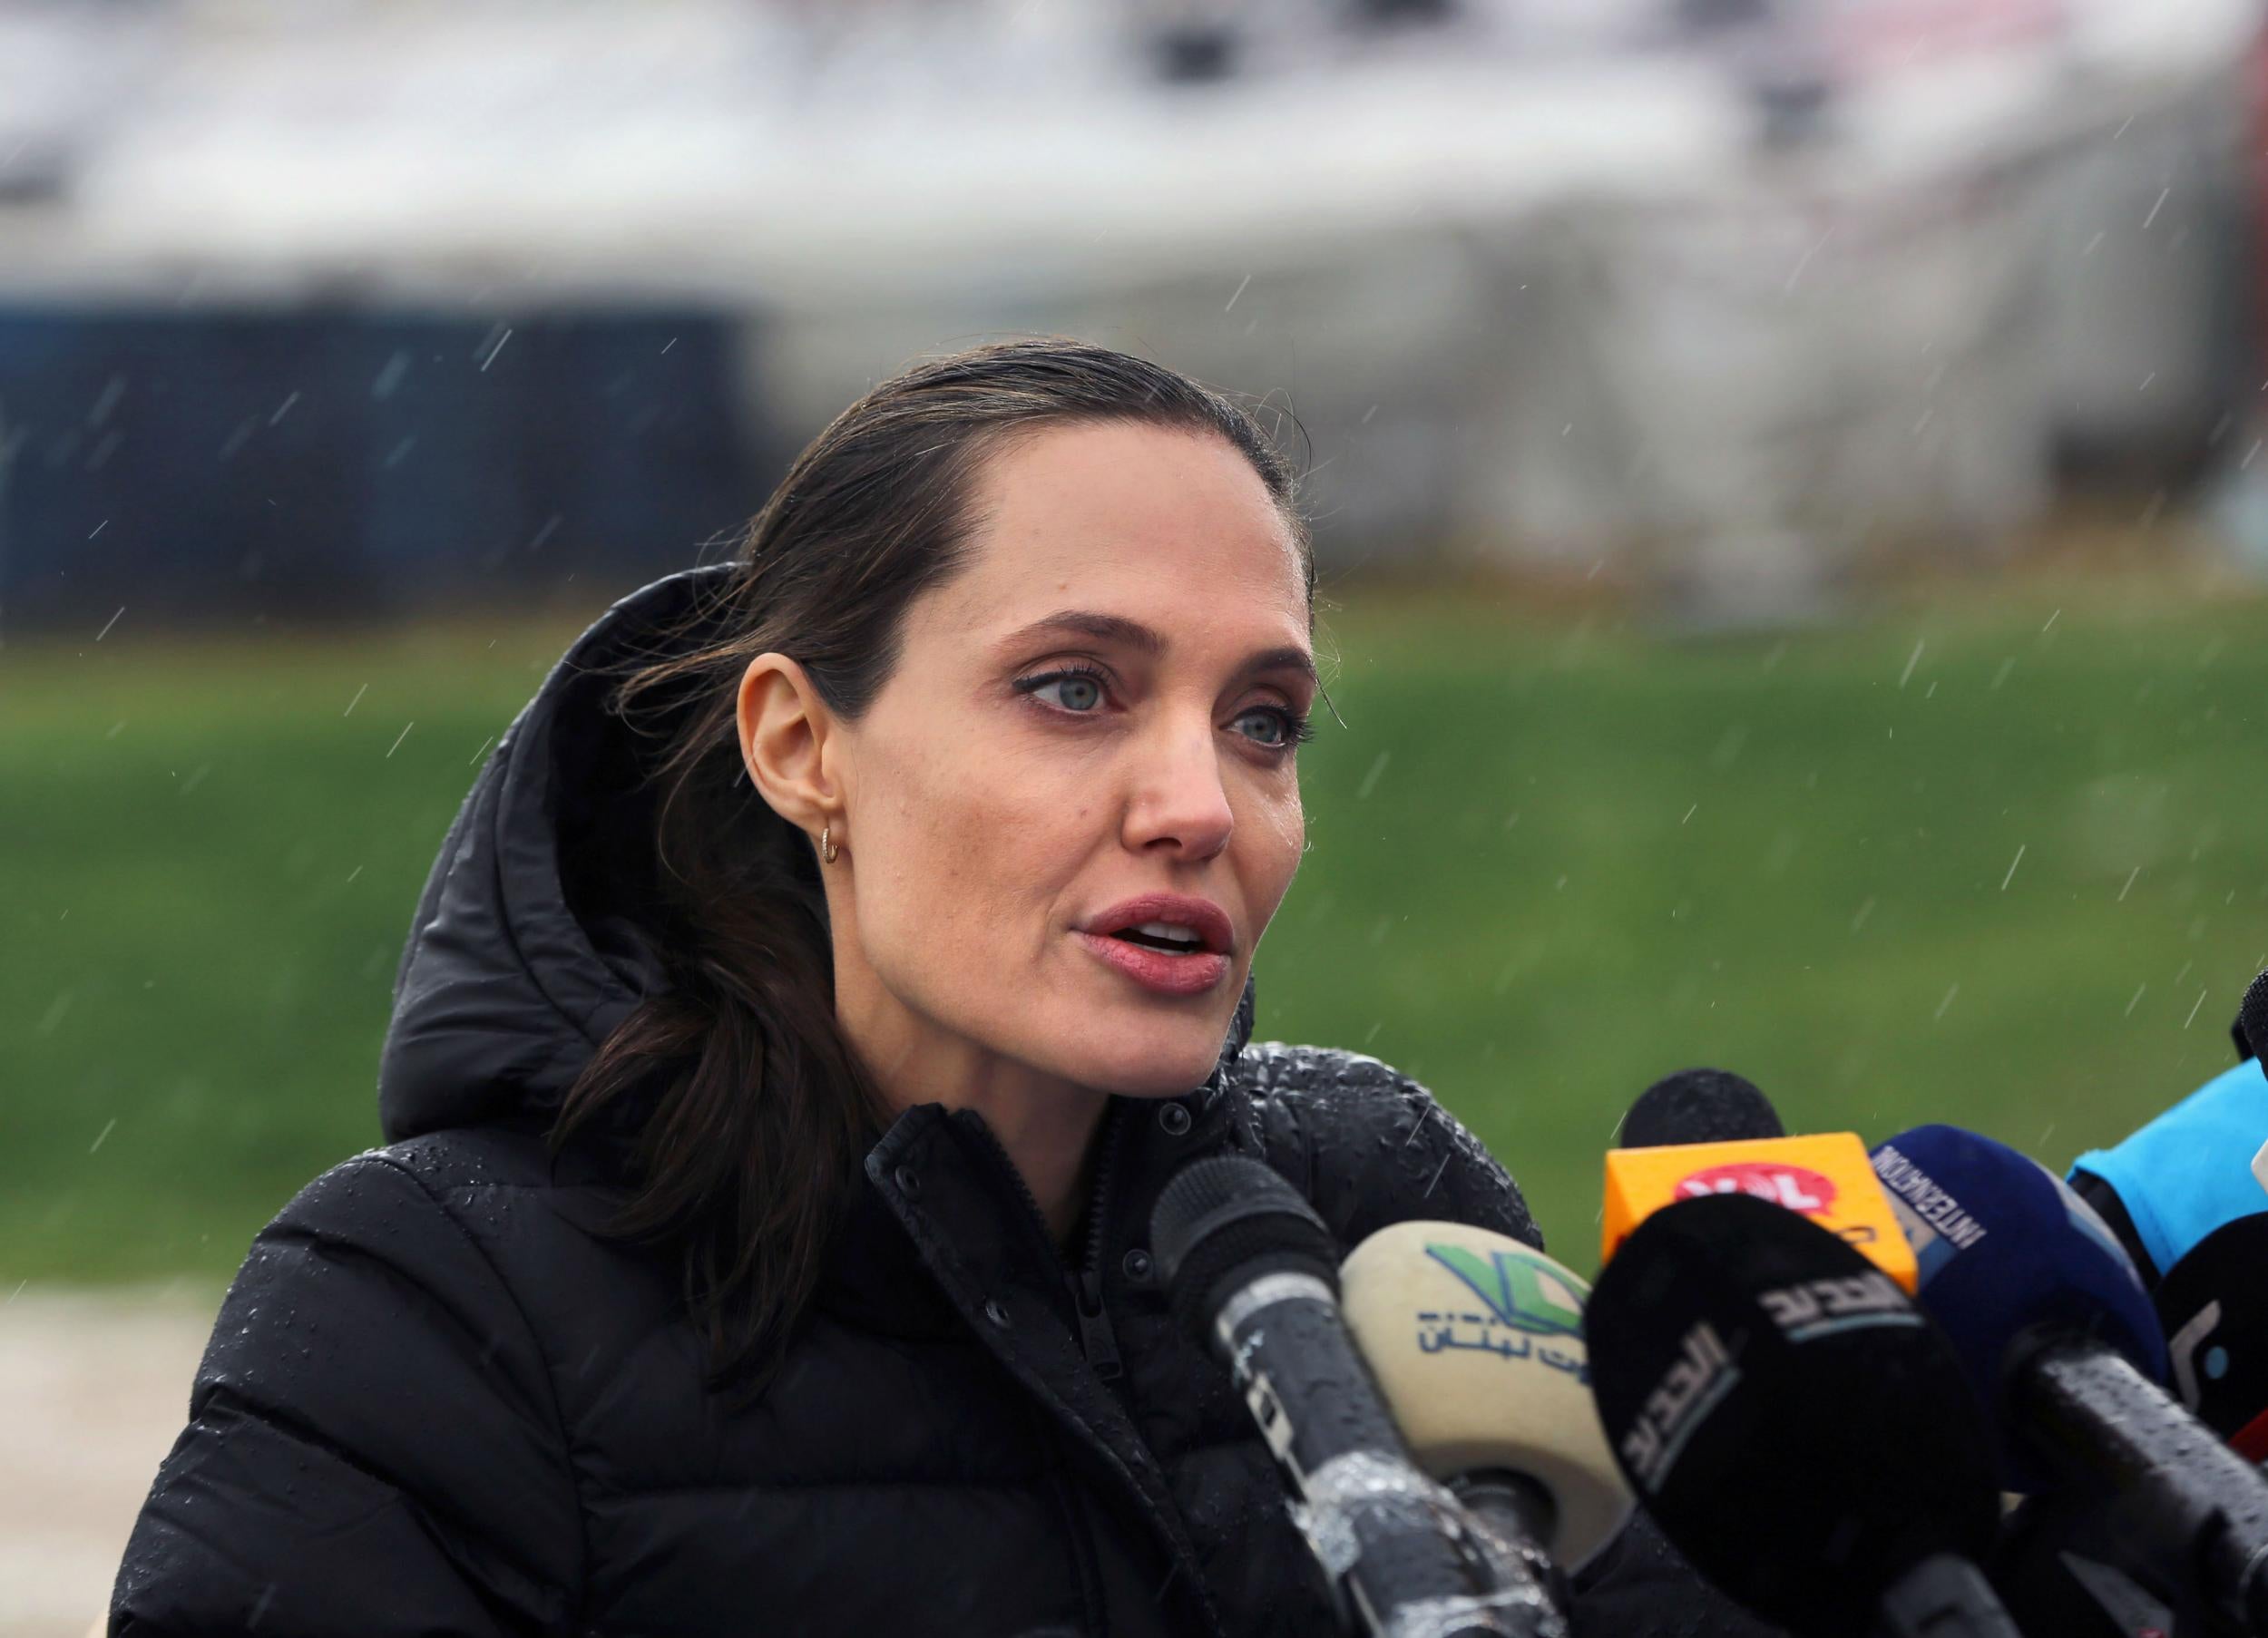 Ms Jolie said after five years of conflict she had hoped for Syrian families to be able to return home